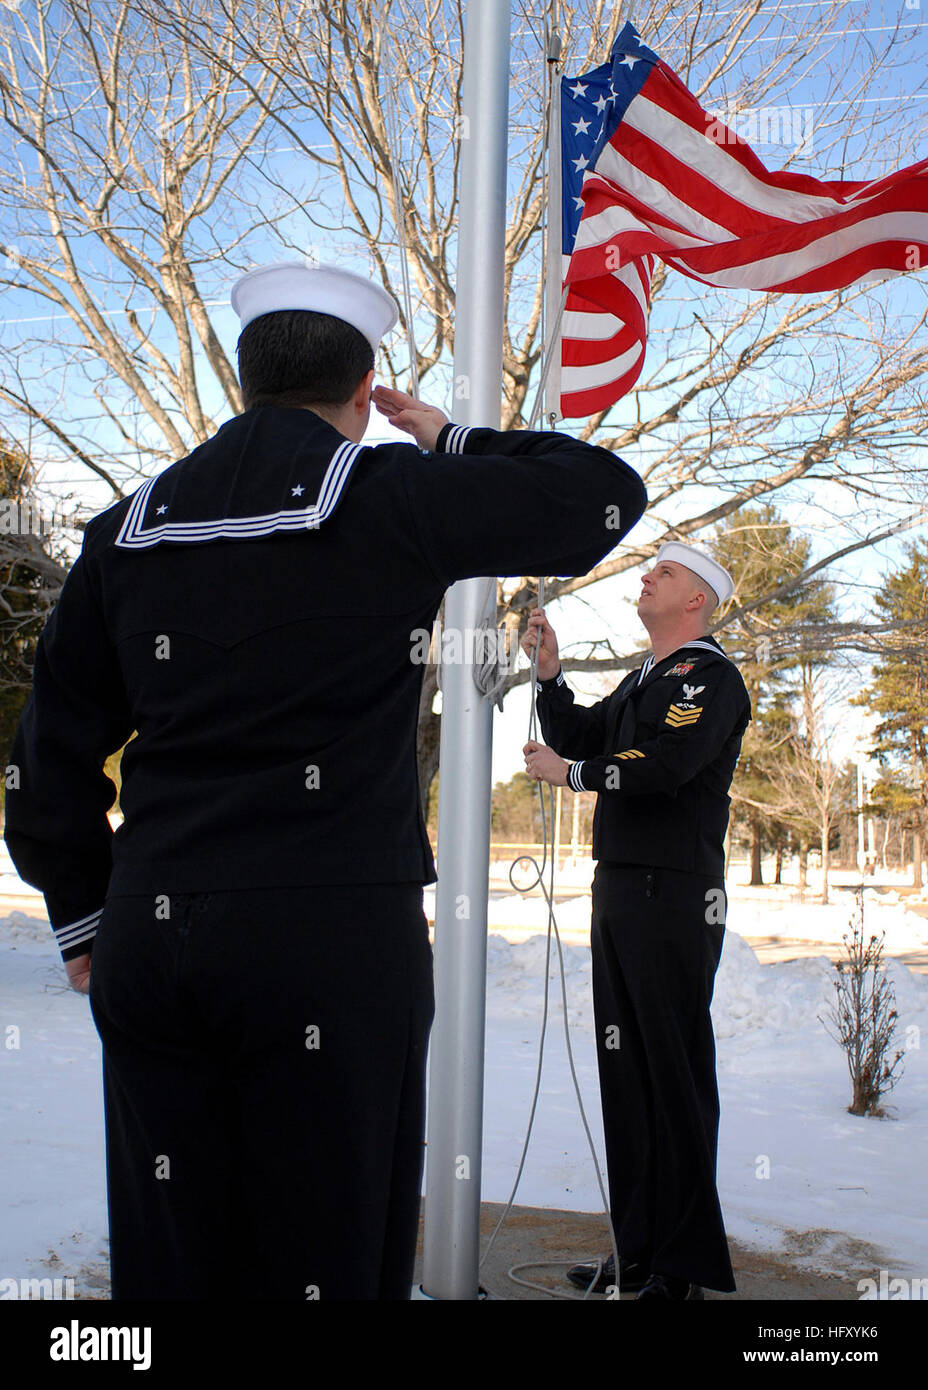 091223-N-9898L-006 NAVAL AIR STATION BRUNSWICK (Dec. 23, 2009) Aviation Electronics Technician 2nd Class Alejandro Benavides renders honors as Aviation Structural Mechanic 1st Class Andrew Johnson lowers the American flag outside of the Navy Operational Support Center (NOSC) Brunswick, Maine, drill hall before a disestablishment ceremony. (U.S. Navy photo by Mass Communication Specialist 3rd Class Geoffrey Lewis/Released) US Navy 091223-N-9898L-006 Aviation Electronics Technician 2nd Class Alejandro Benavides renders honors as Aviation Structural Mechanic 1st Class Andrew Johnson lowers the Am Stock Photo